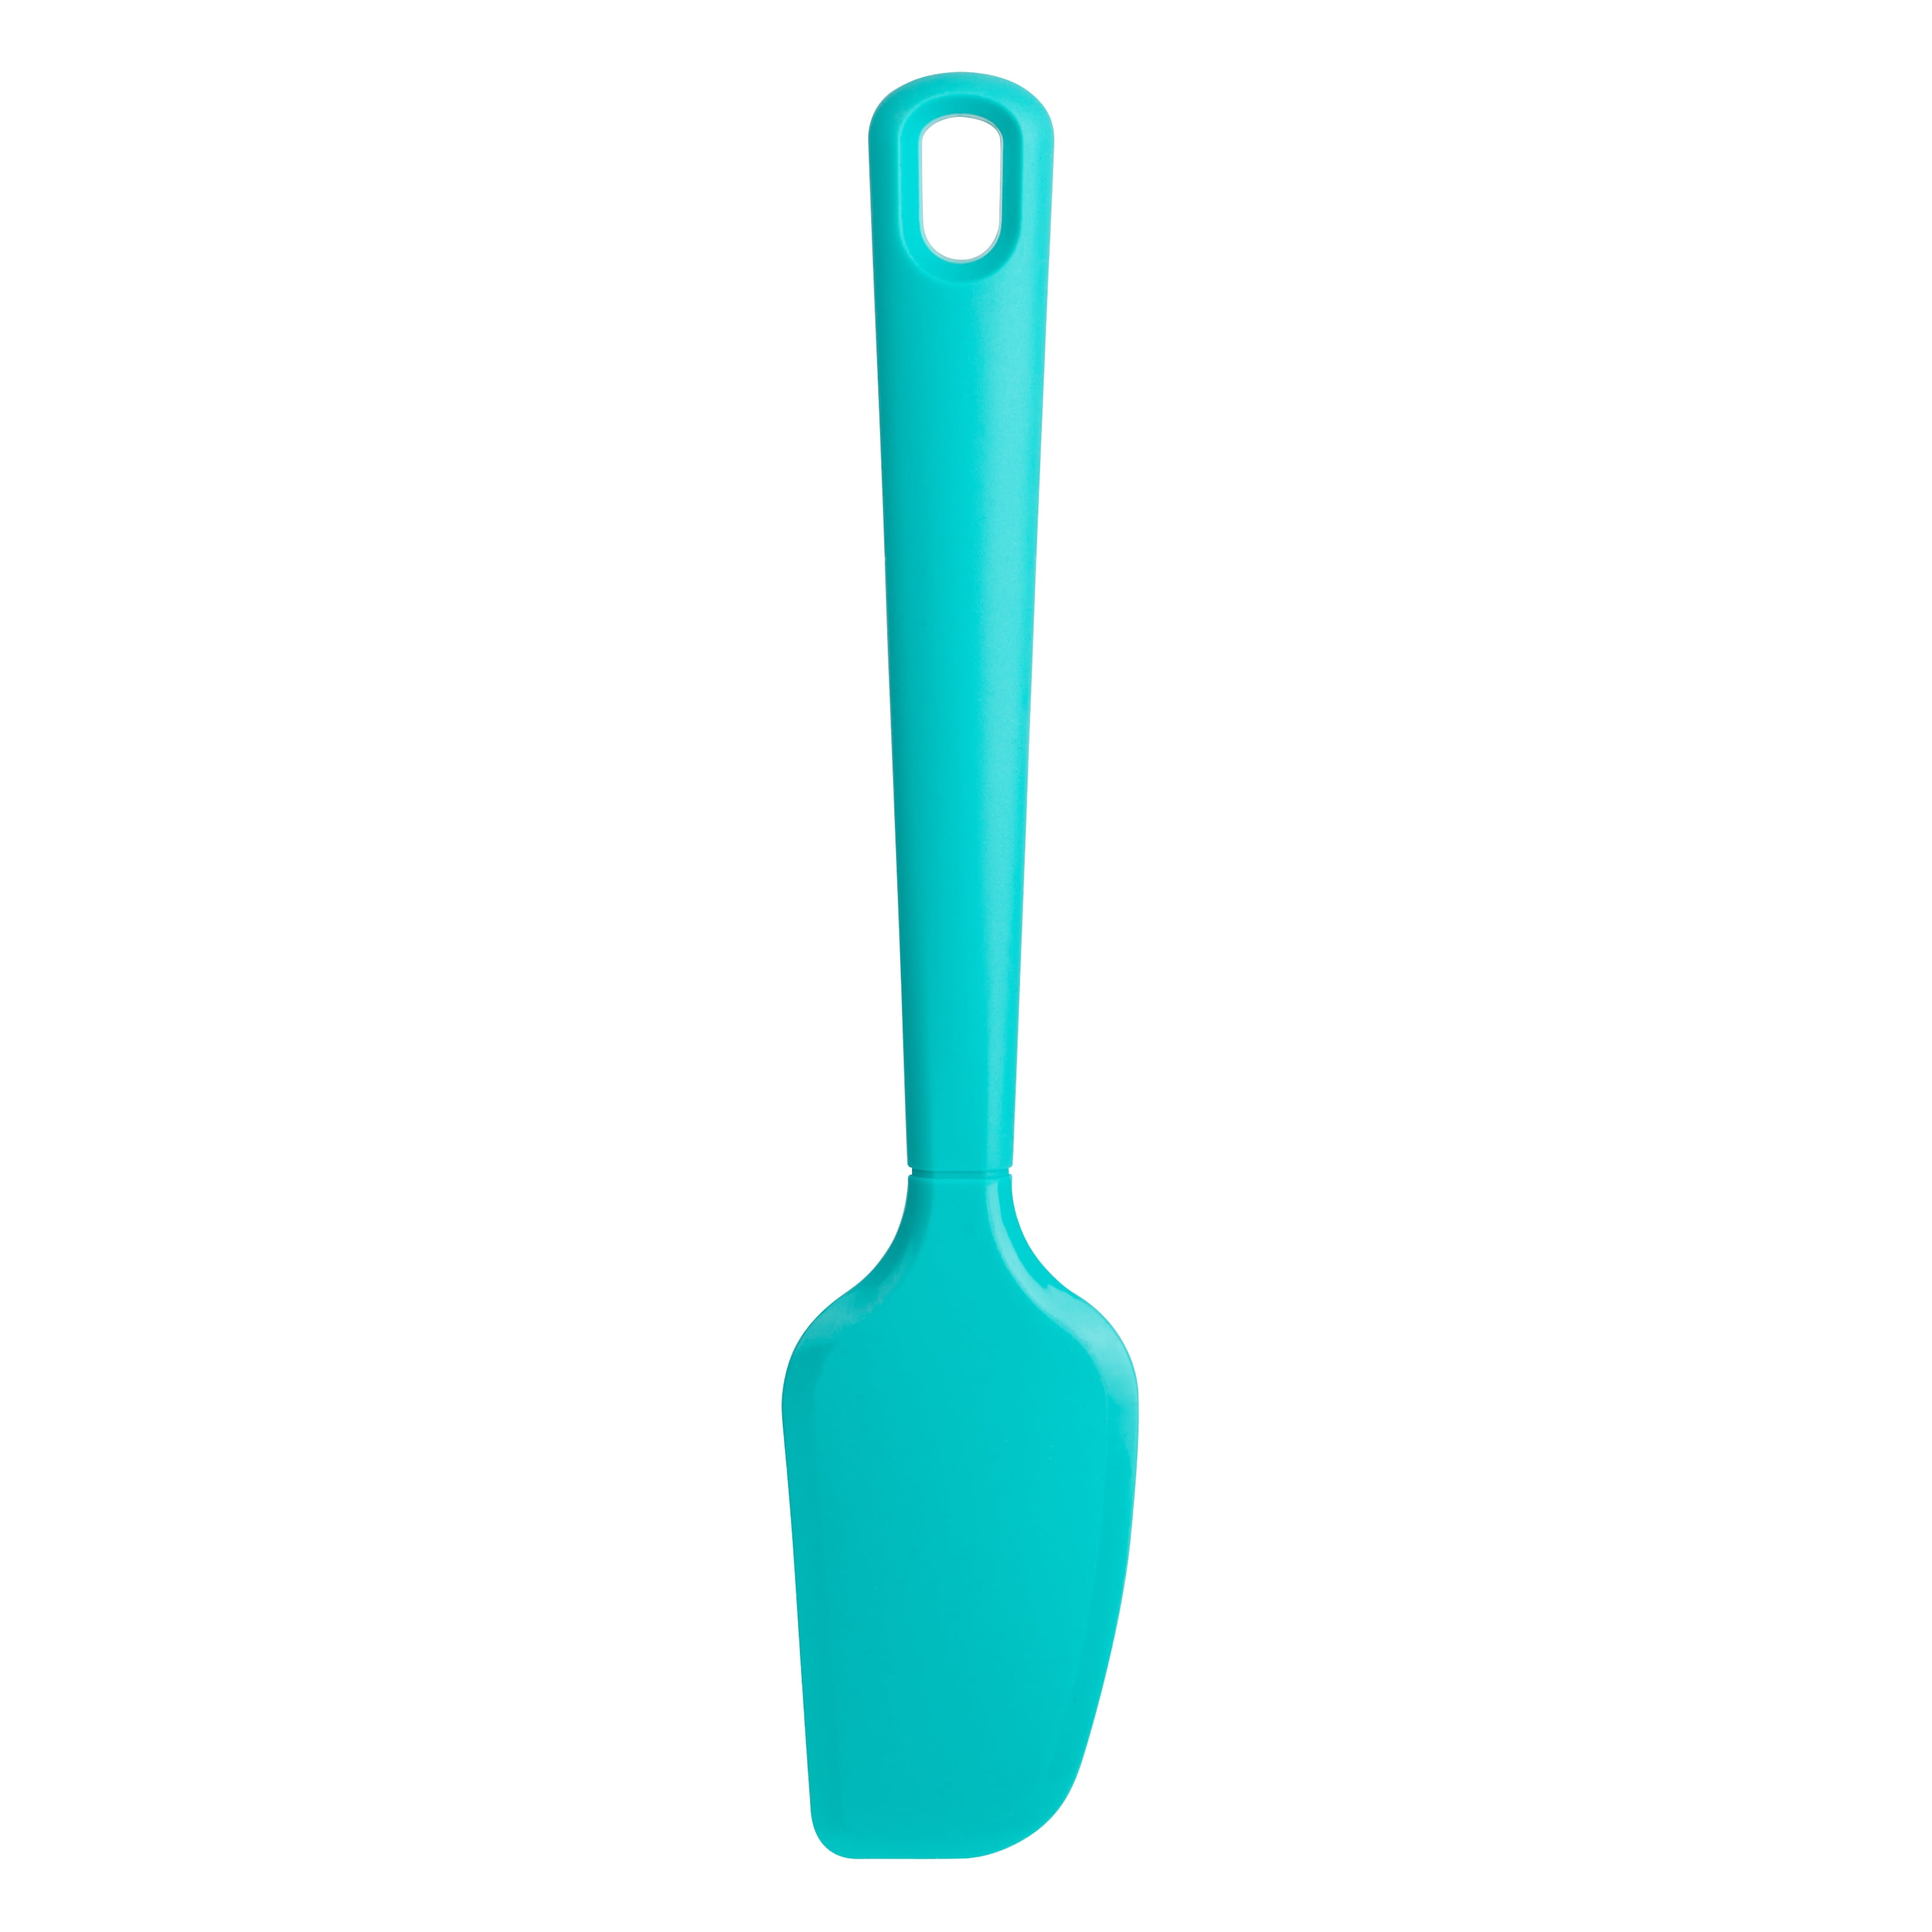 Mainstays 10.25" Heat Resistant (428F-220C) Teal Silicone Spatula